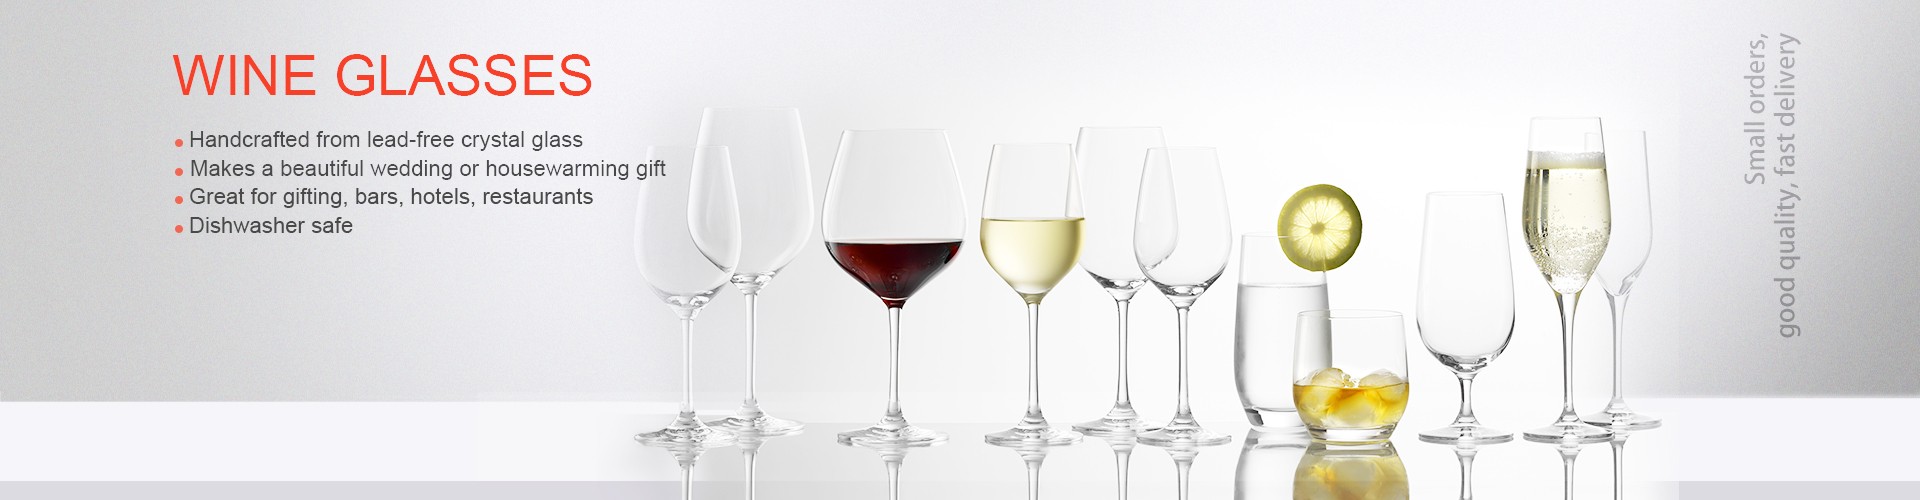 handcrafted lead-free crystal wine glasses vendor